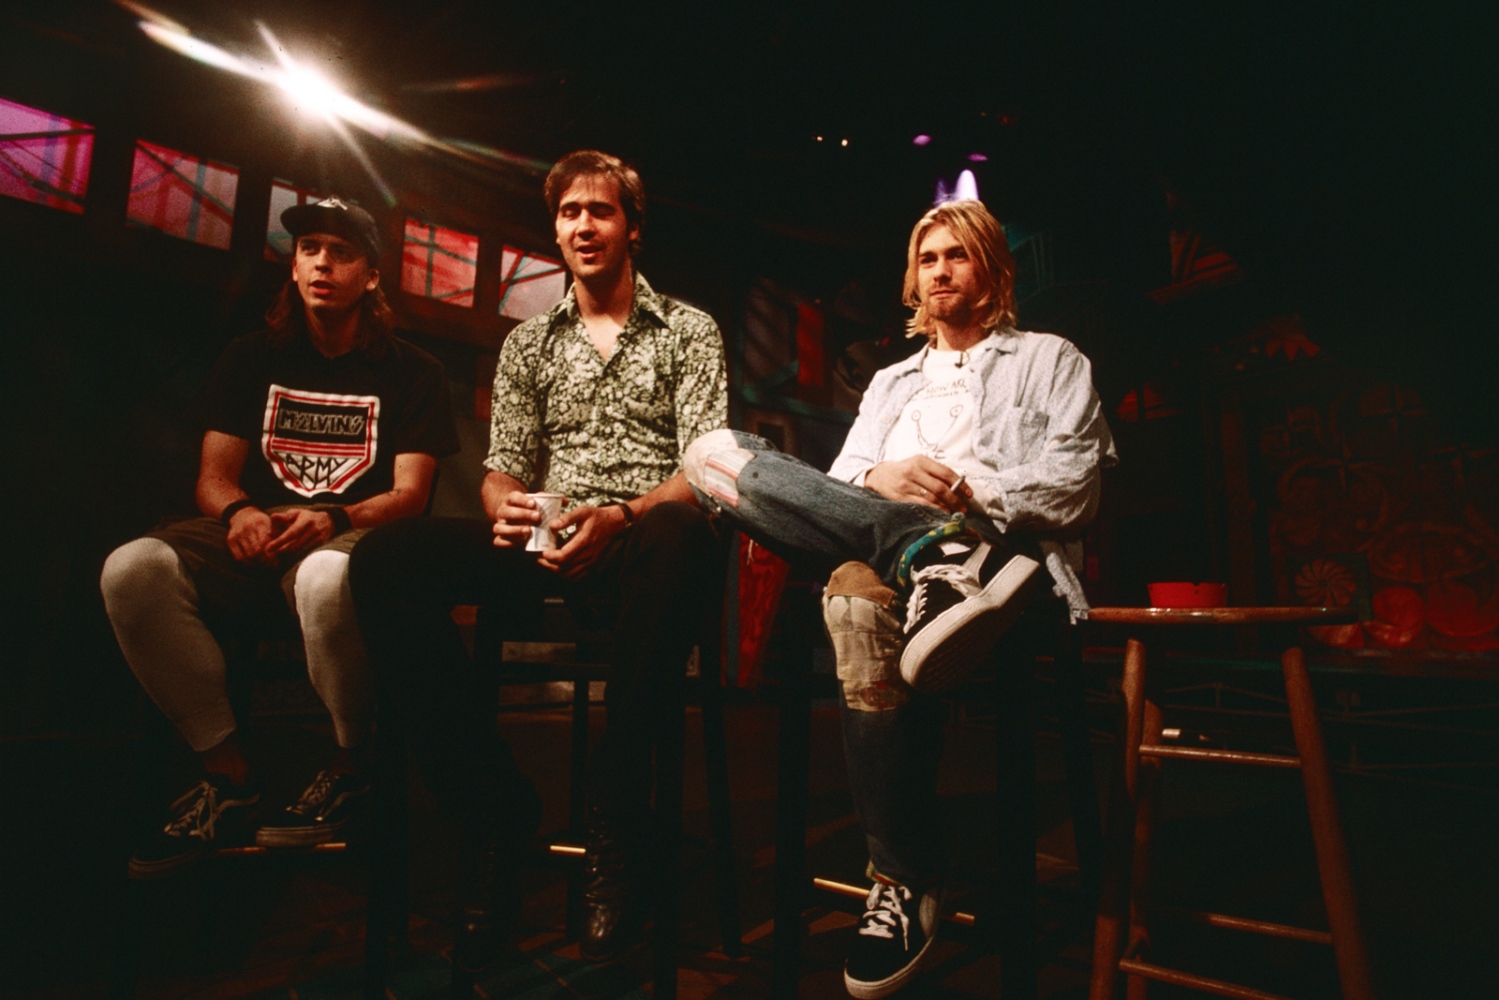 ROCK N ROLL FOR LIFE, NY TIMES MAGAZINE - Nirvana at MTV Unplugged, New York City, 1993